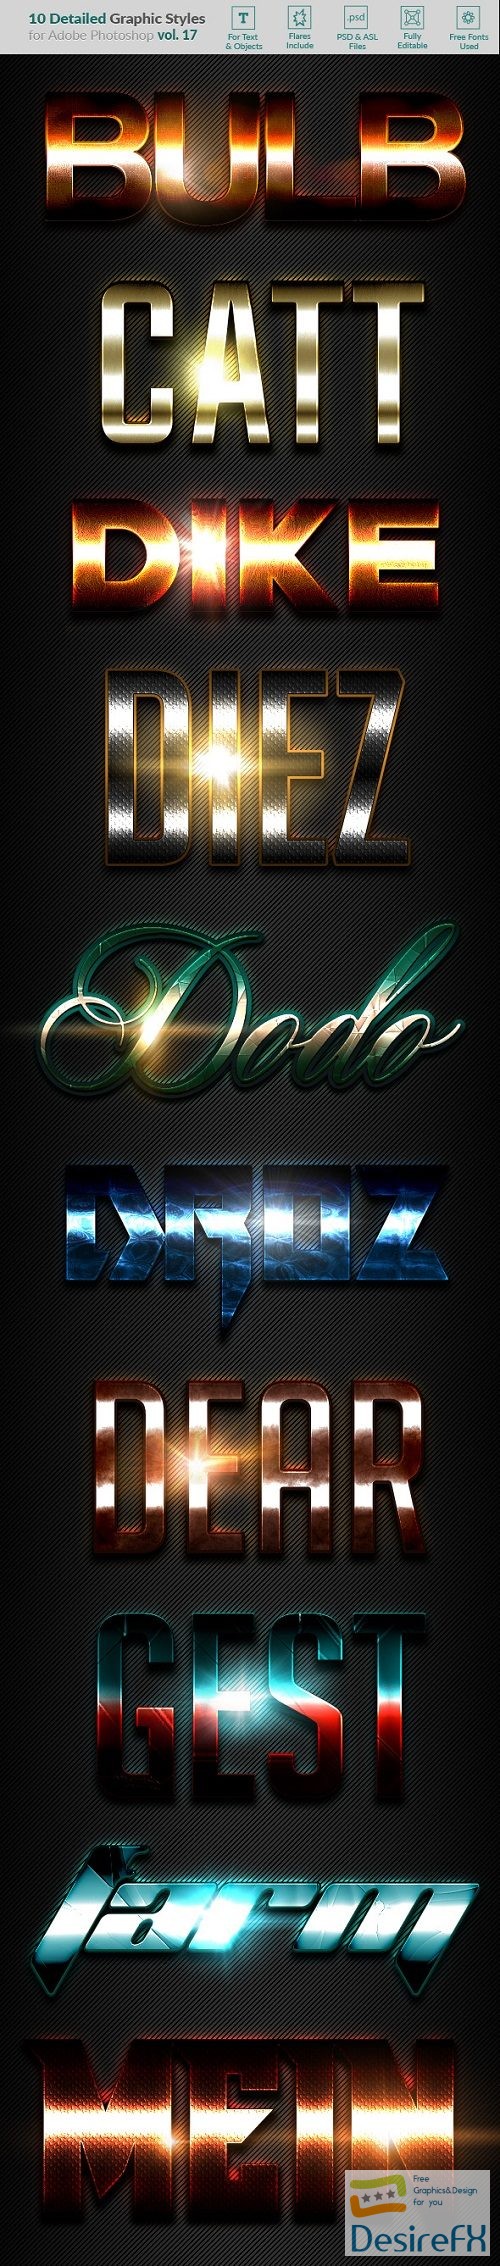 10 Text Effects Vol. 17 21062030